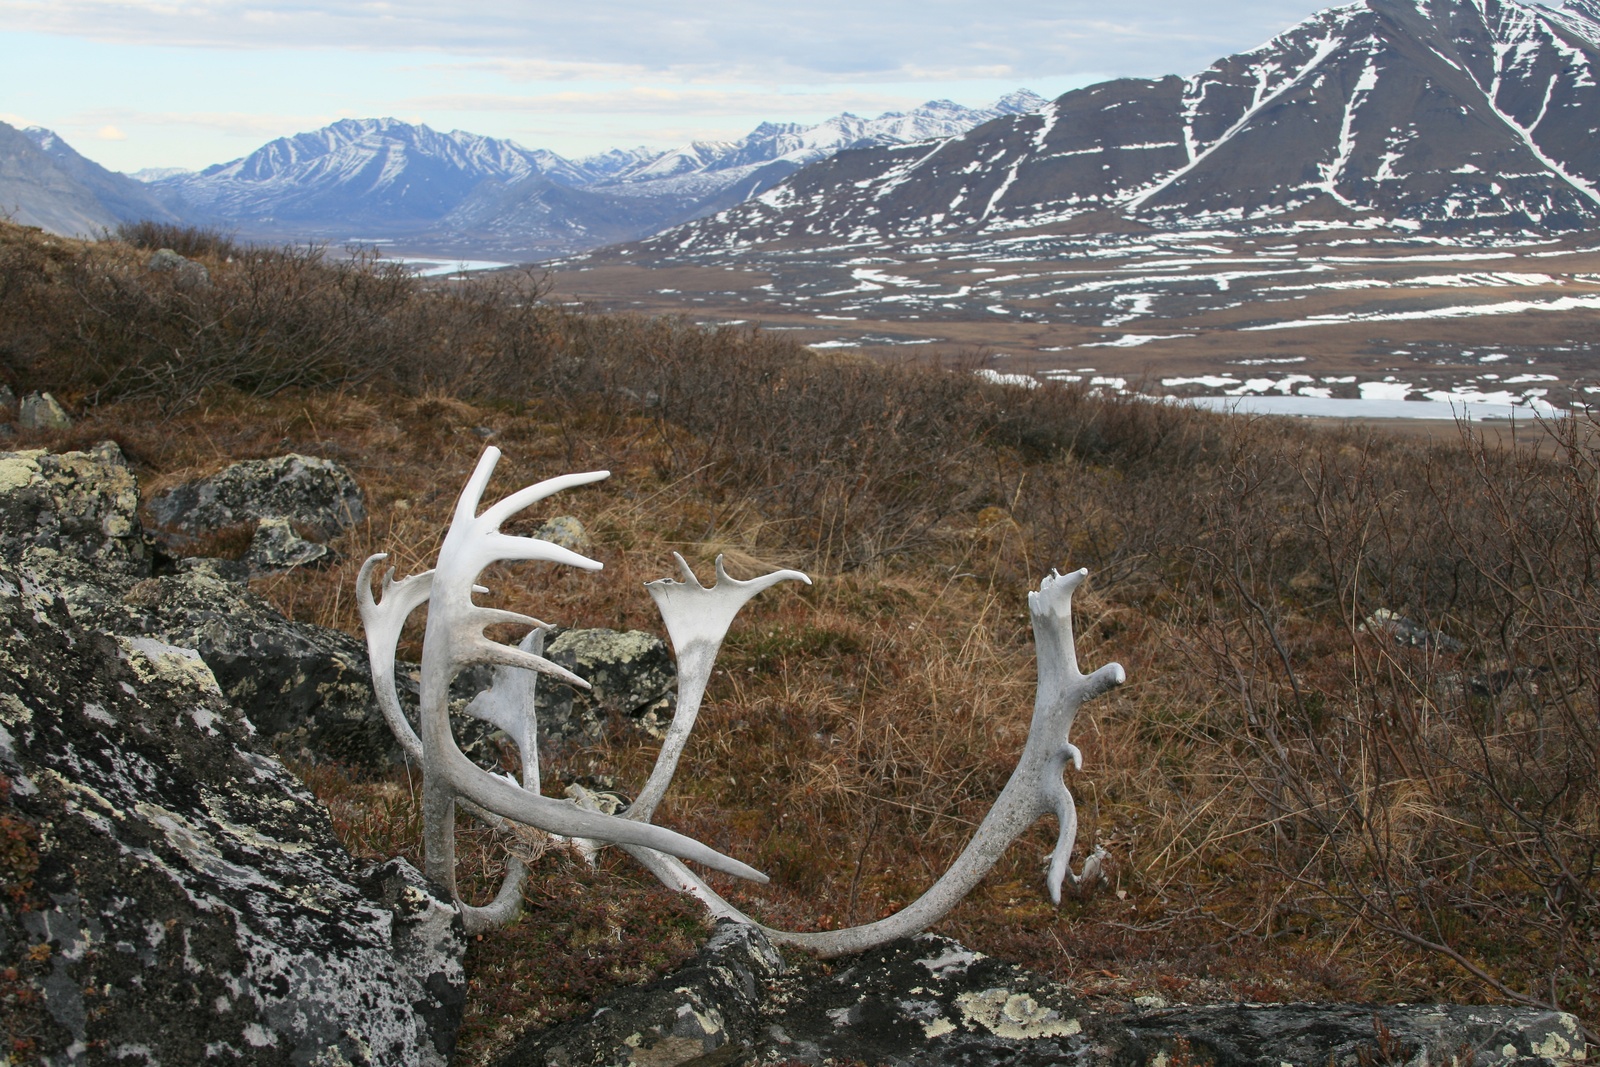 Caribou antlers on a grass-covered hillside. Snowy mountains are in the background.